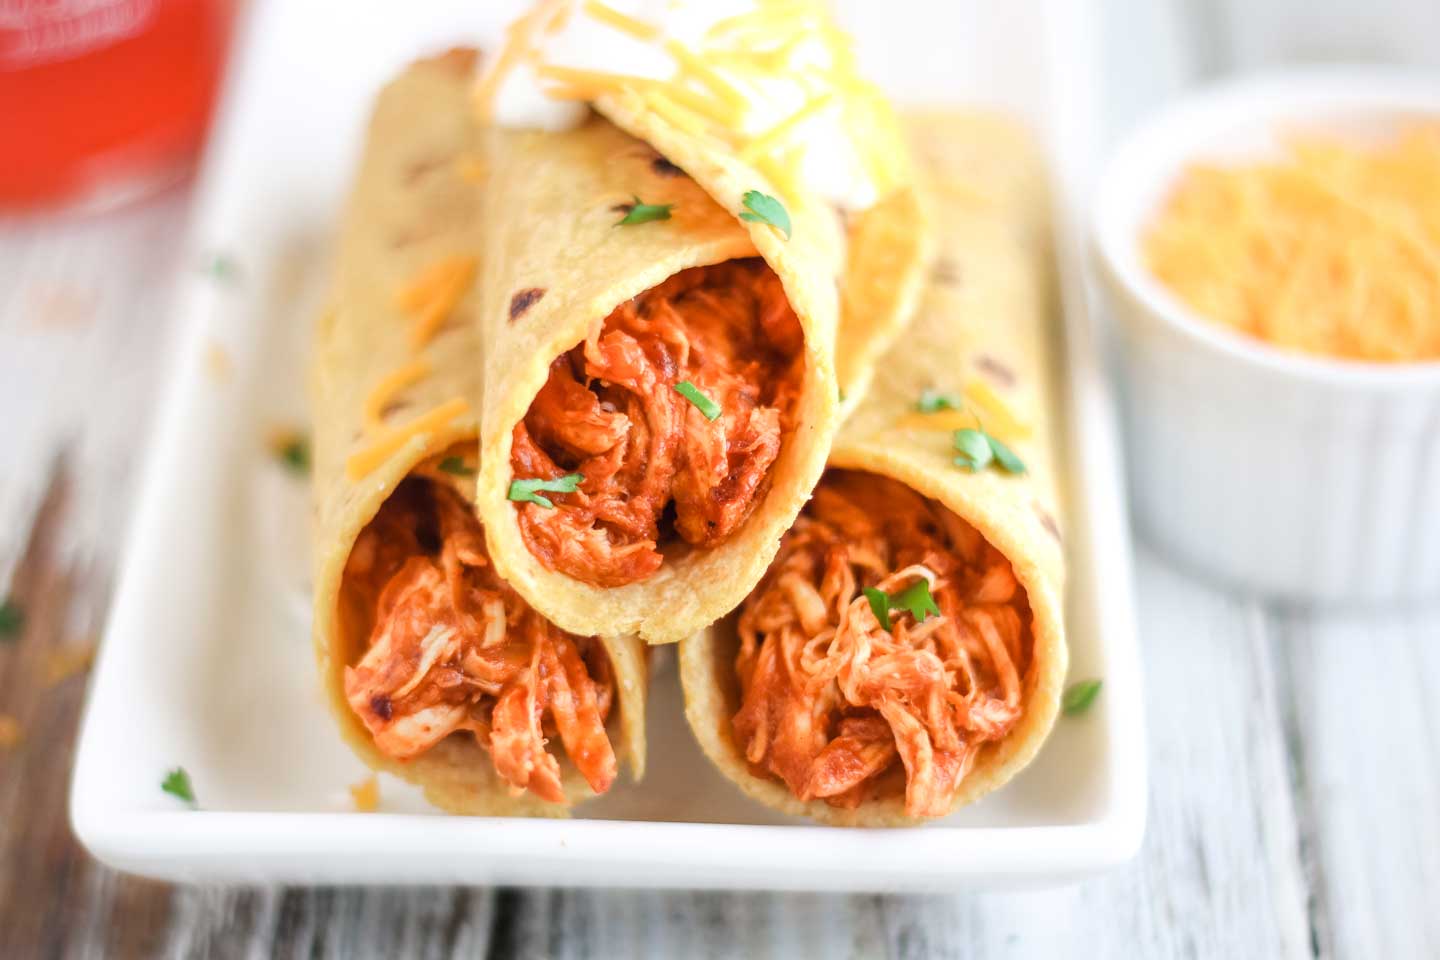 A stack of 3 clay pot chicken tacos on a long serving plate, made very simply with just the slow-cooking chicken taco meat wrapped in corn tortillas.